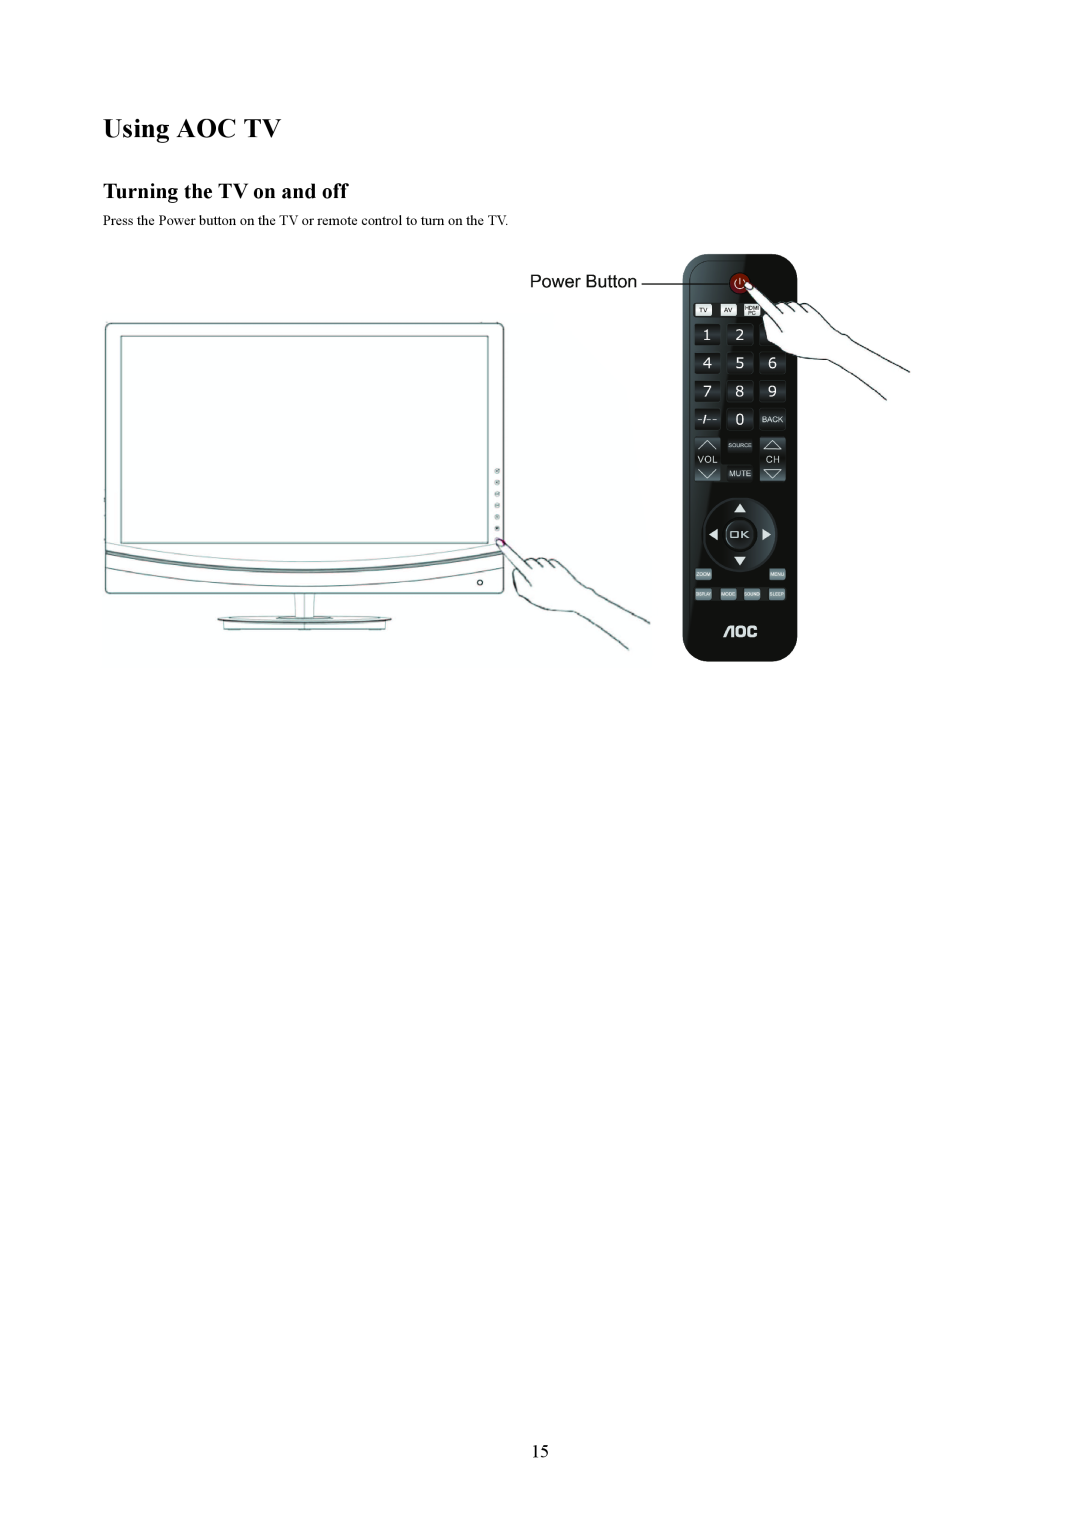 AOC T2242WE, T2442E manual Using AOC TV, Turning the TV on and off 